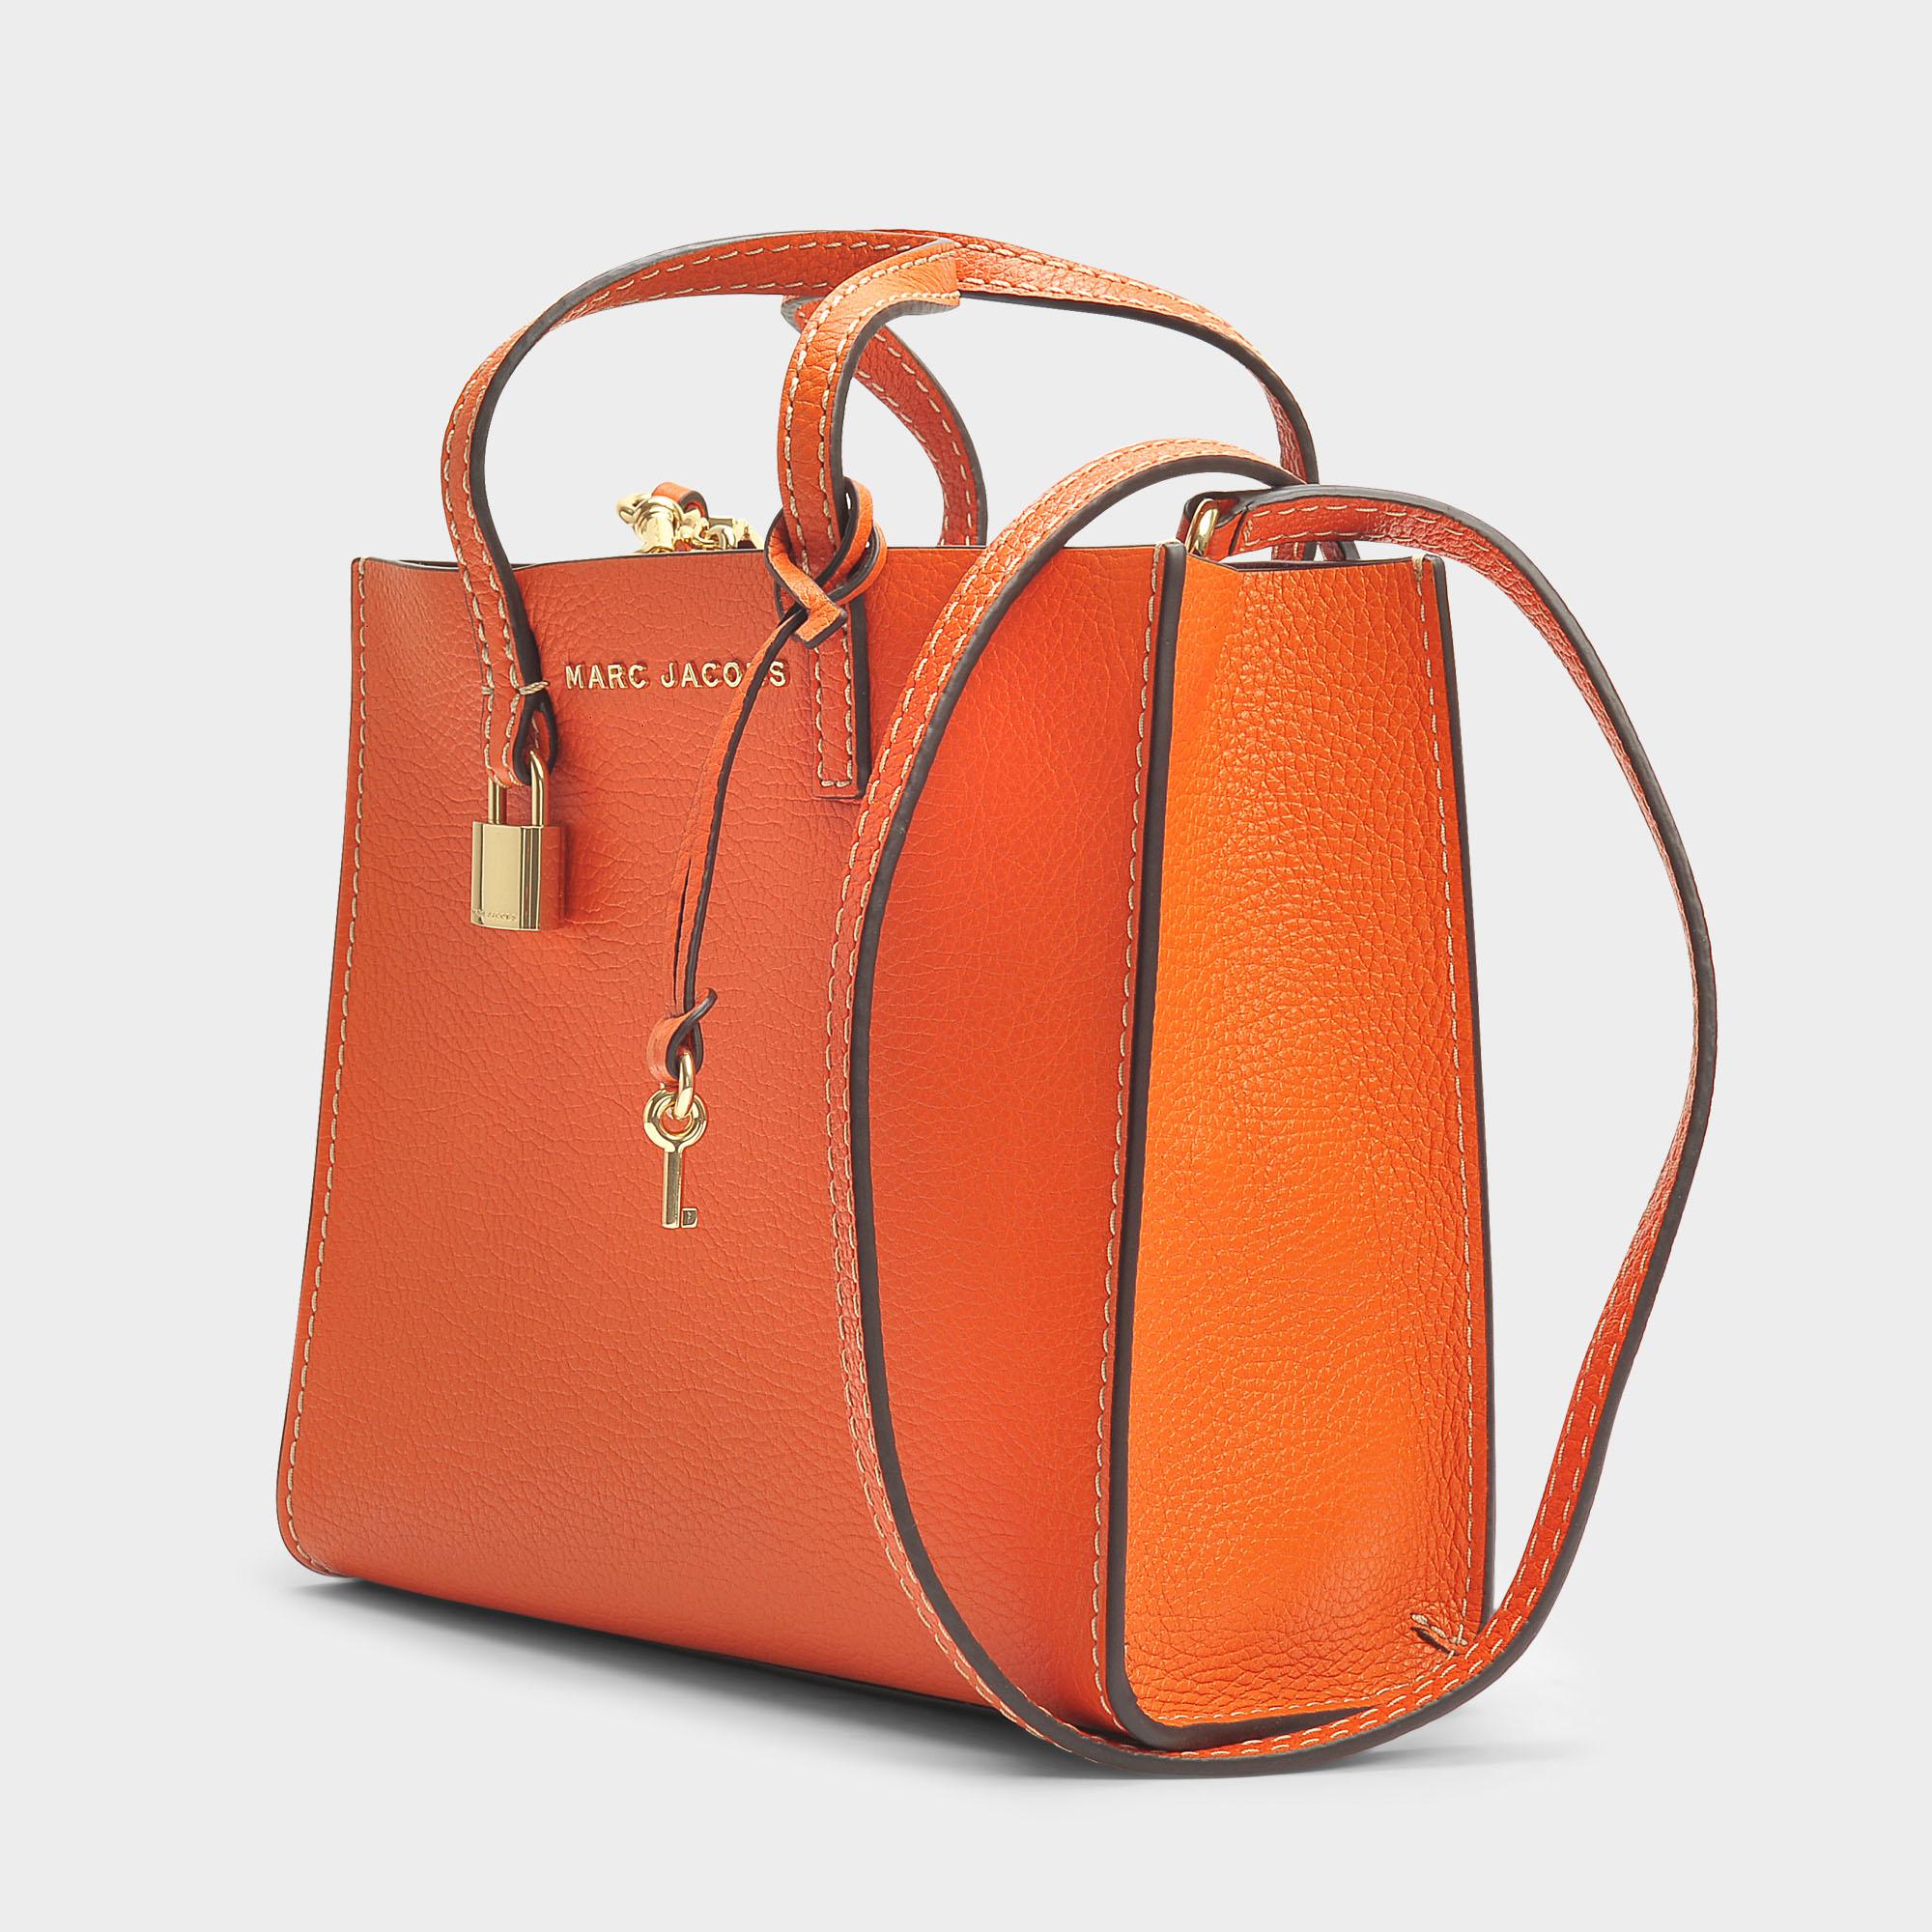 Marc Jacobs The Mini Grind Tote Bag In White Glow Cow Leather in Orange